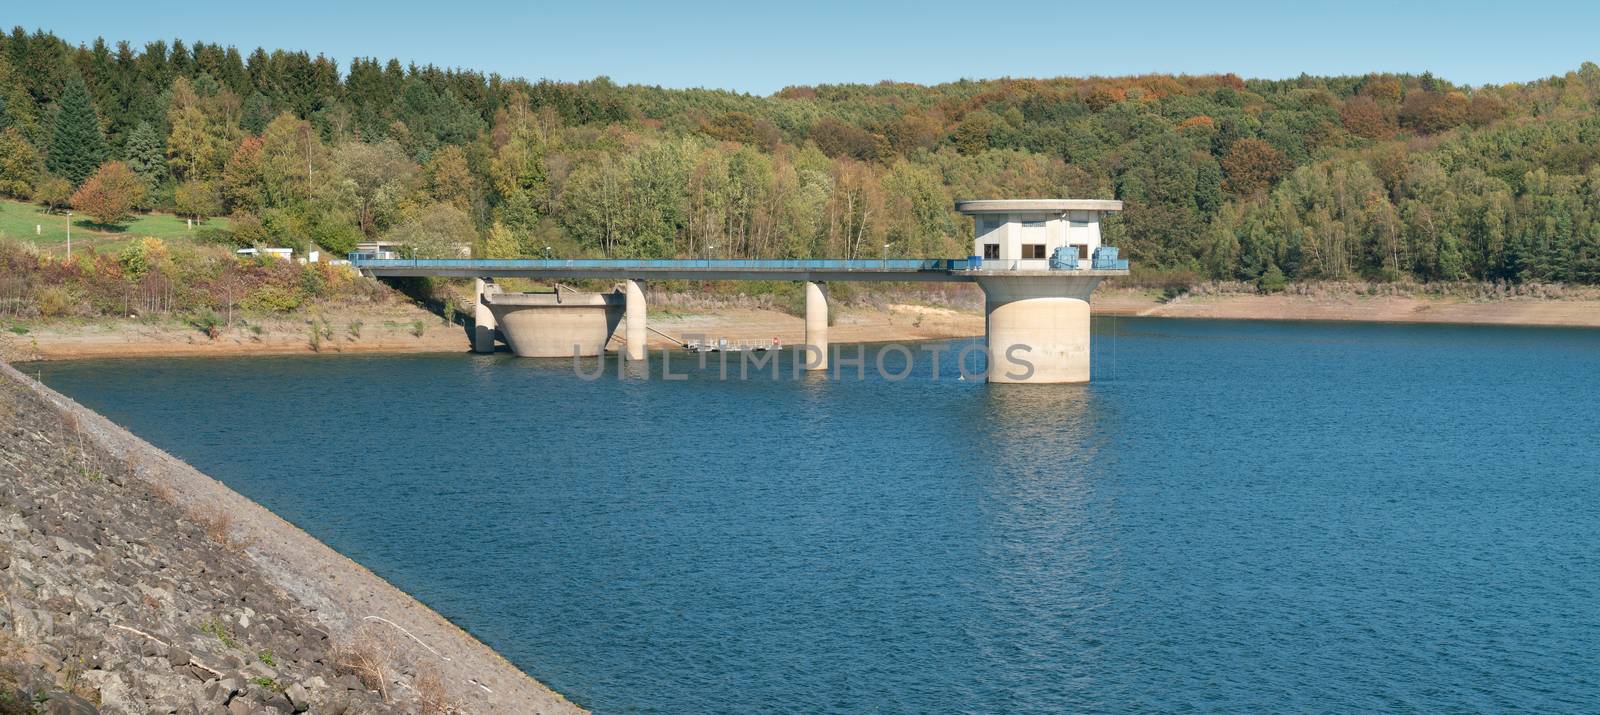 Empty reservoir of Dhunn river during the drought in Germany in 2018